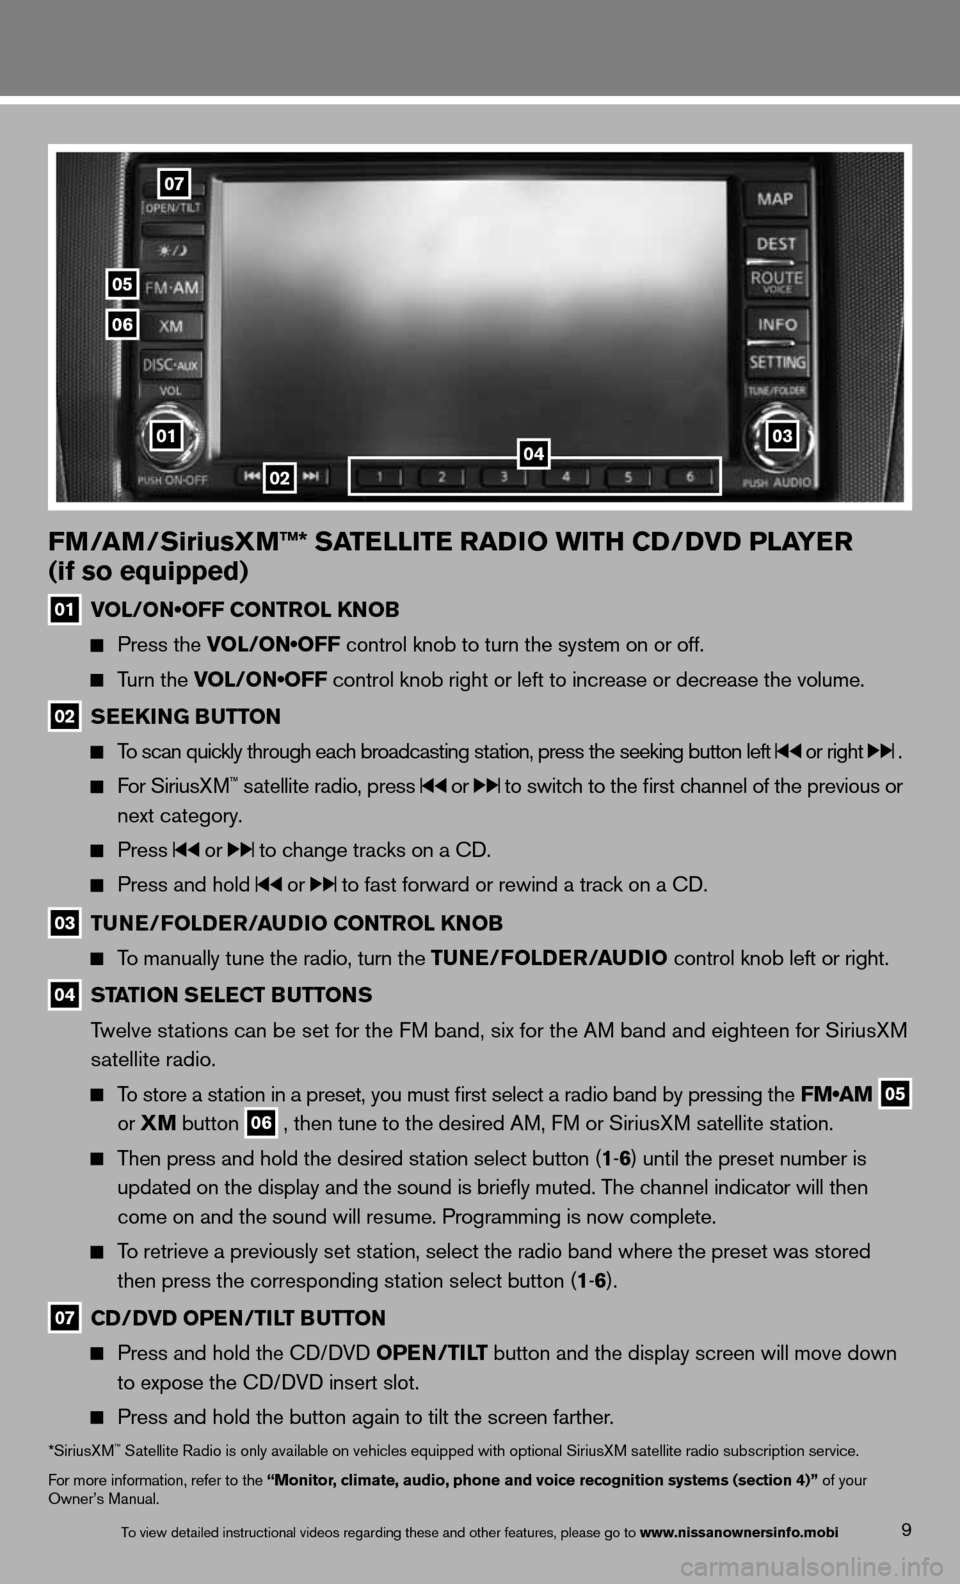 NISSAN ALTIMA COUPE 2013 D32 / 4.G Quick Reference Guide 9
FM/AM/SiriusXM™* SATELLITE RADIO WITh CD/DVD PLAYER 
(if so equipped)
01 VOL/ON•OFF CONTROL KNOB
    Press the VOL/ON•OFF control knob to turn the system on or off. 
  
  Turn the VOL/ON•OFF